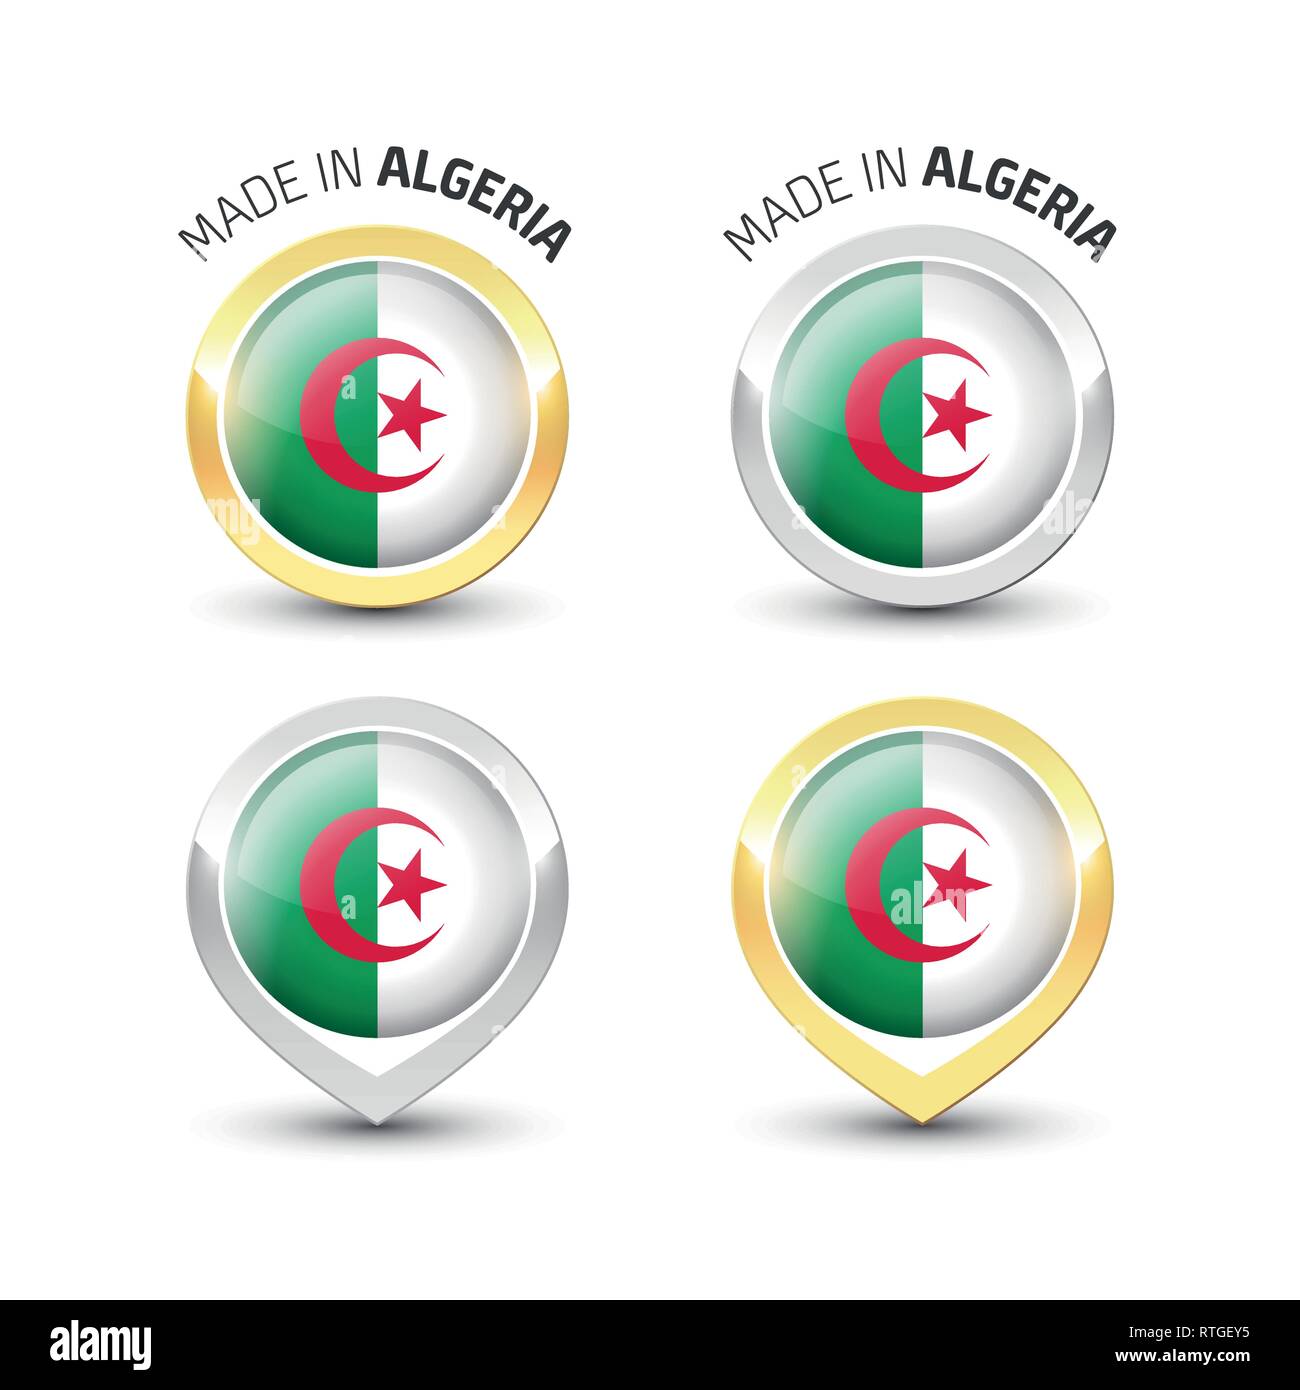 Made in Algeria - Guarantee label with the Algerian flag inside round gold and silver icons. Stock Vector